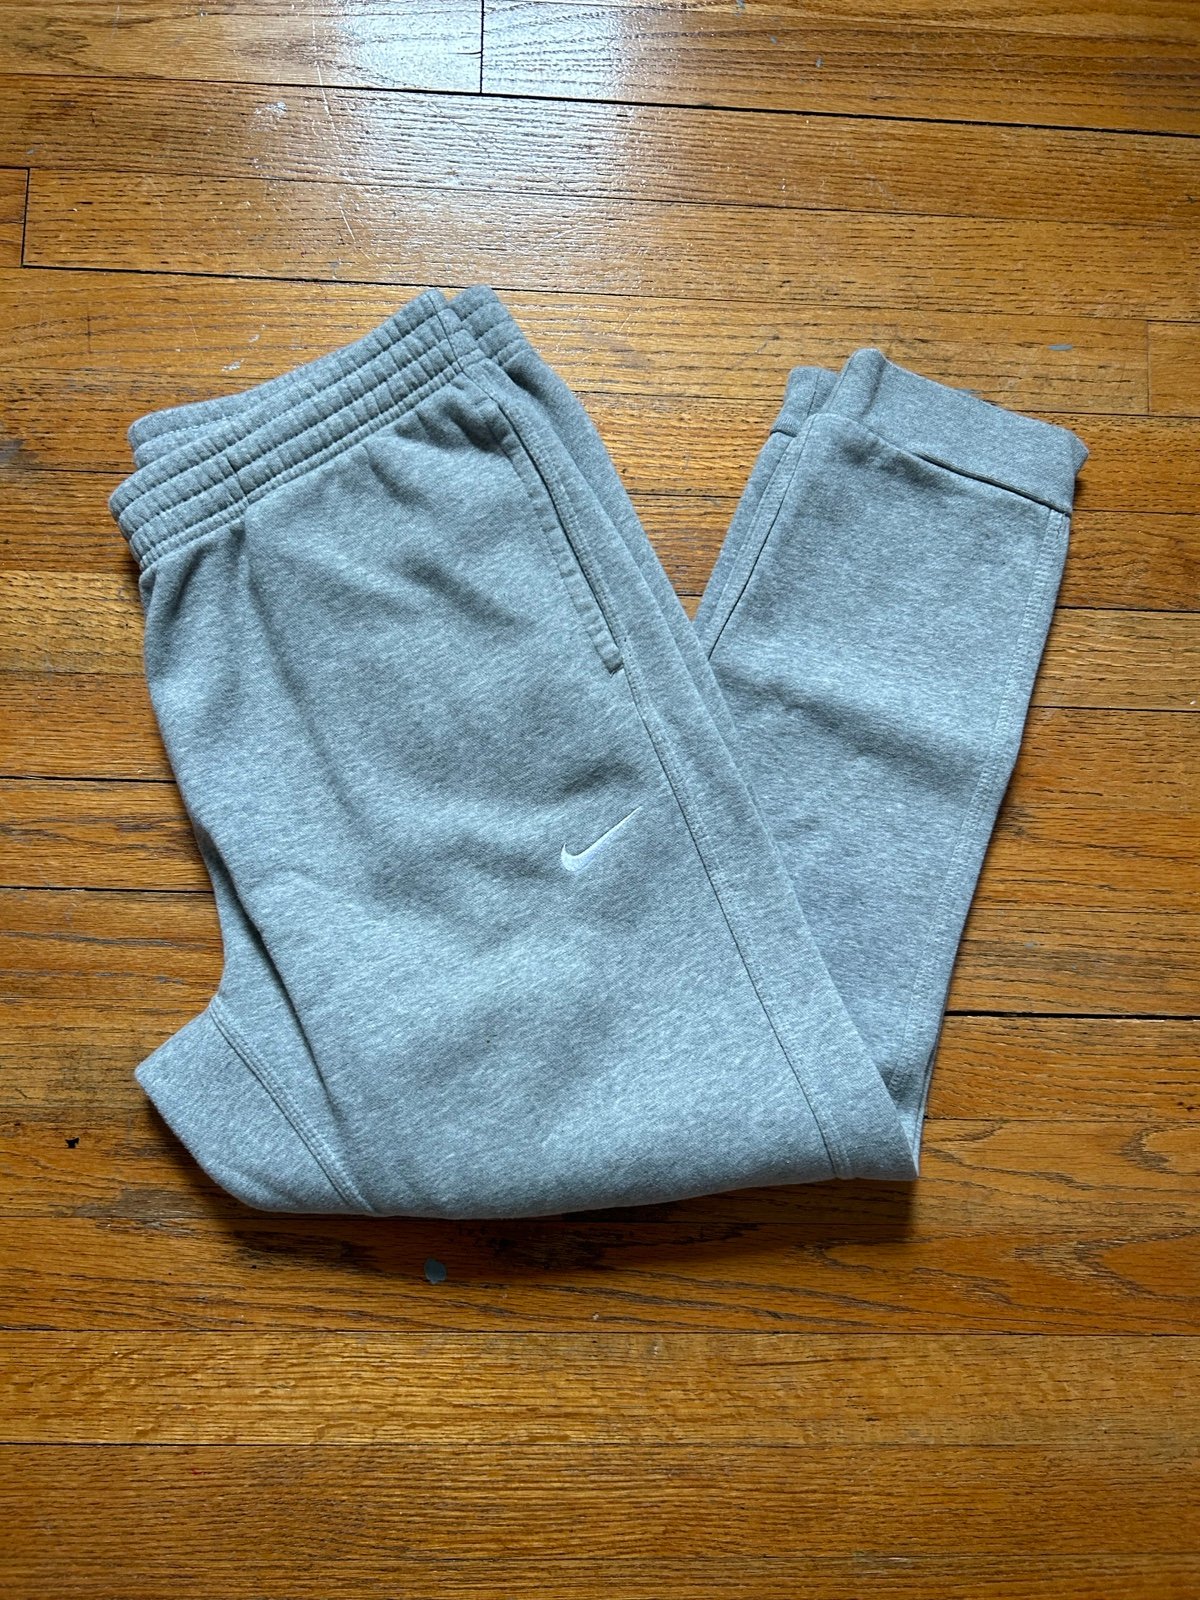 where to buy  Grey Nike Sweatpants Joggers hkihO64s1 Store Online